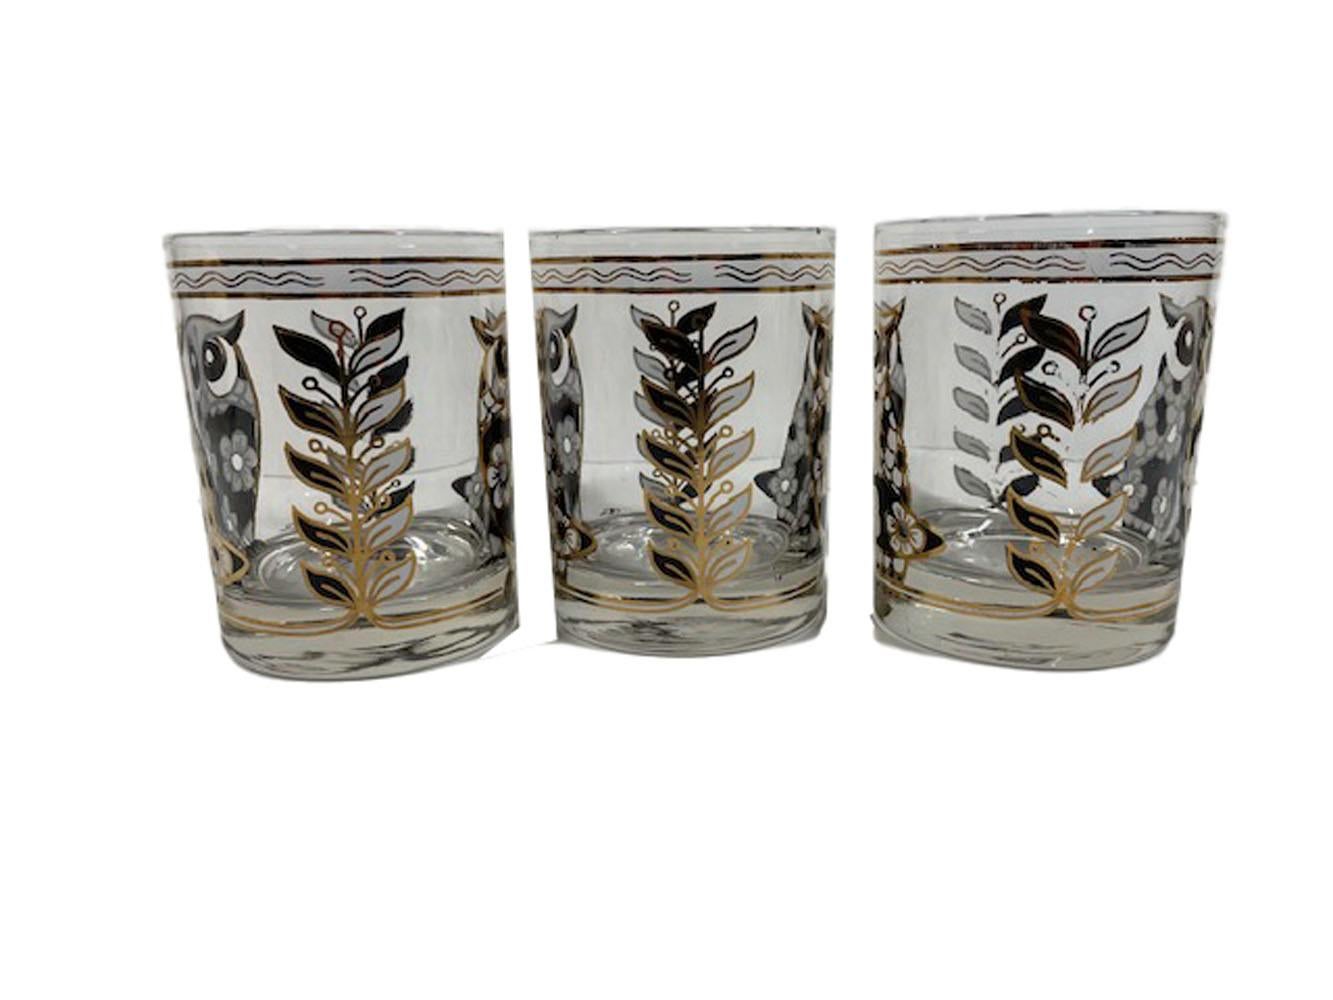 Six Cera Glass Rocks Glasses with Flower Patterned Owls in Black, White and Gold In Good Condition For Sale In Nantucket, MA